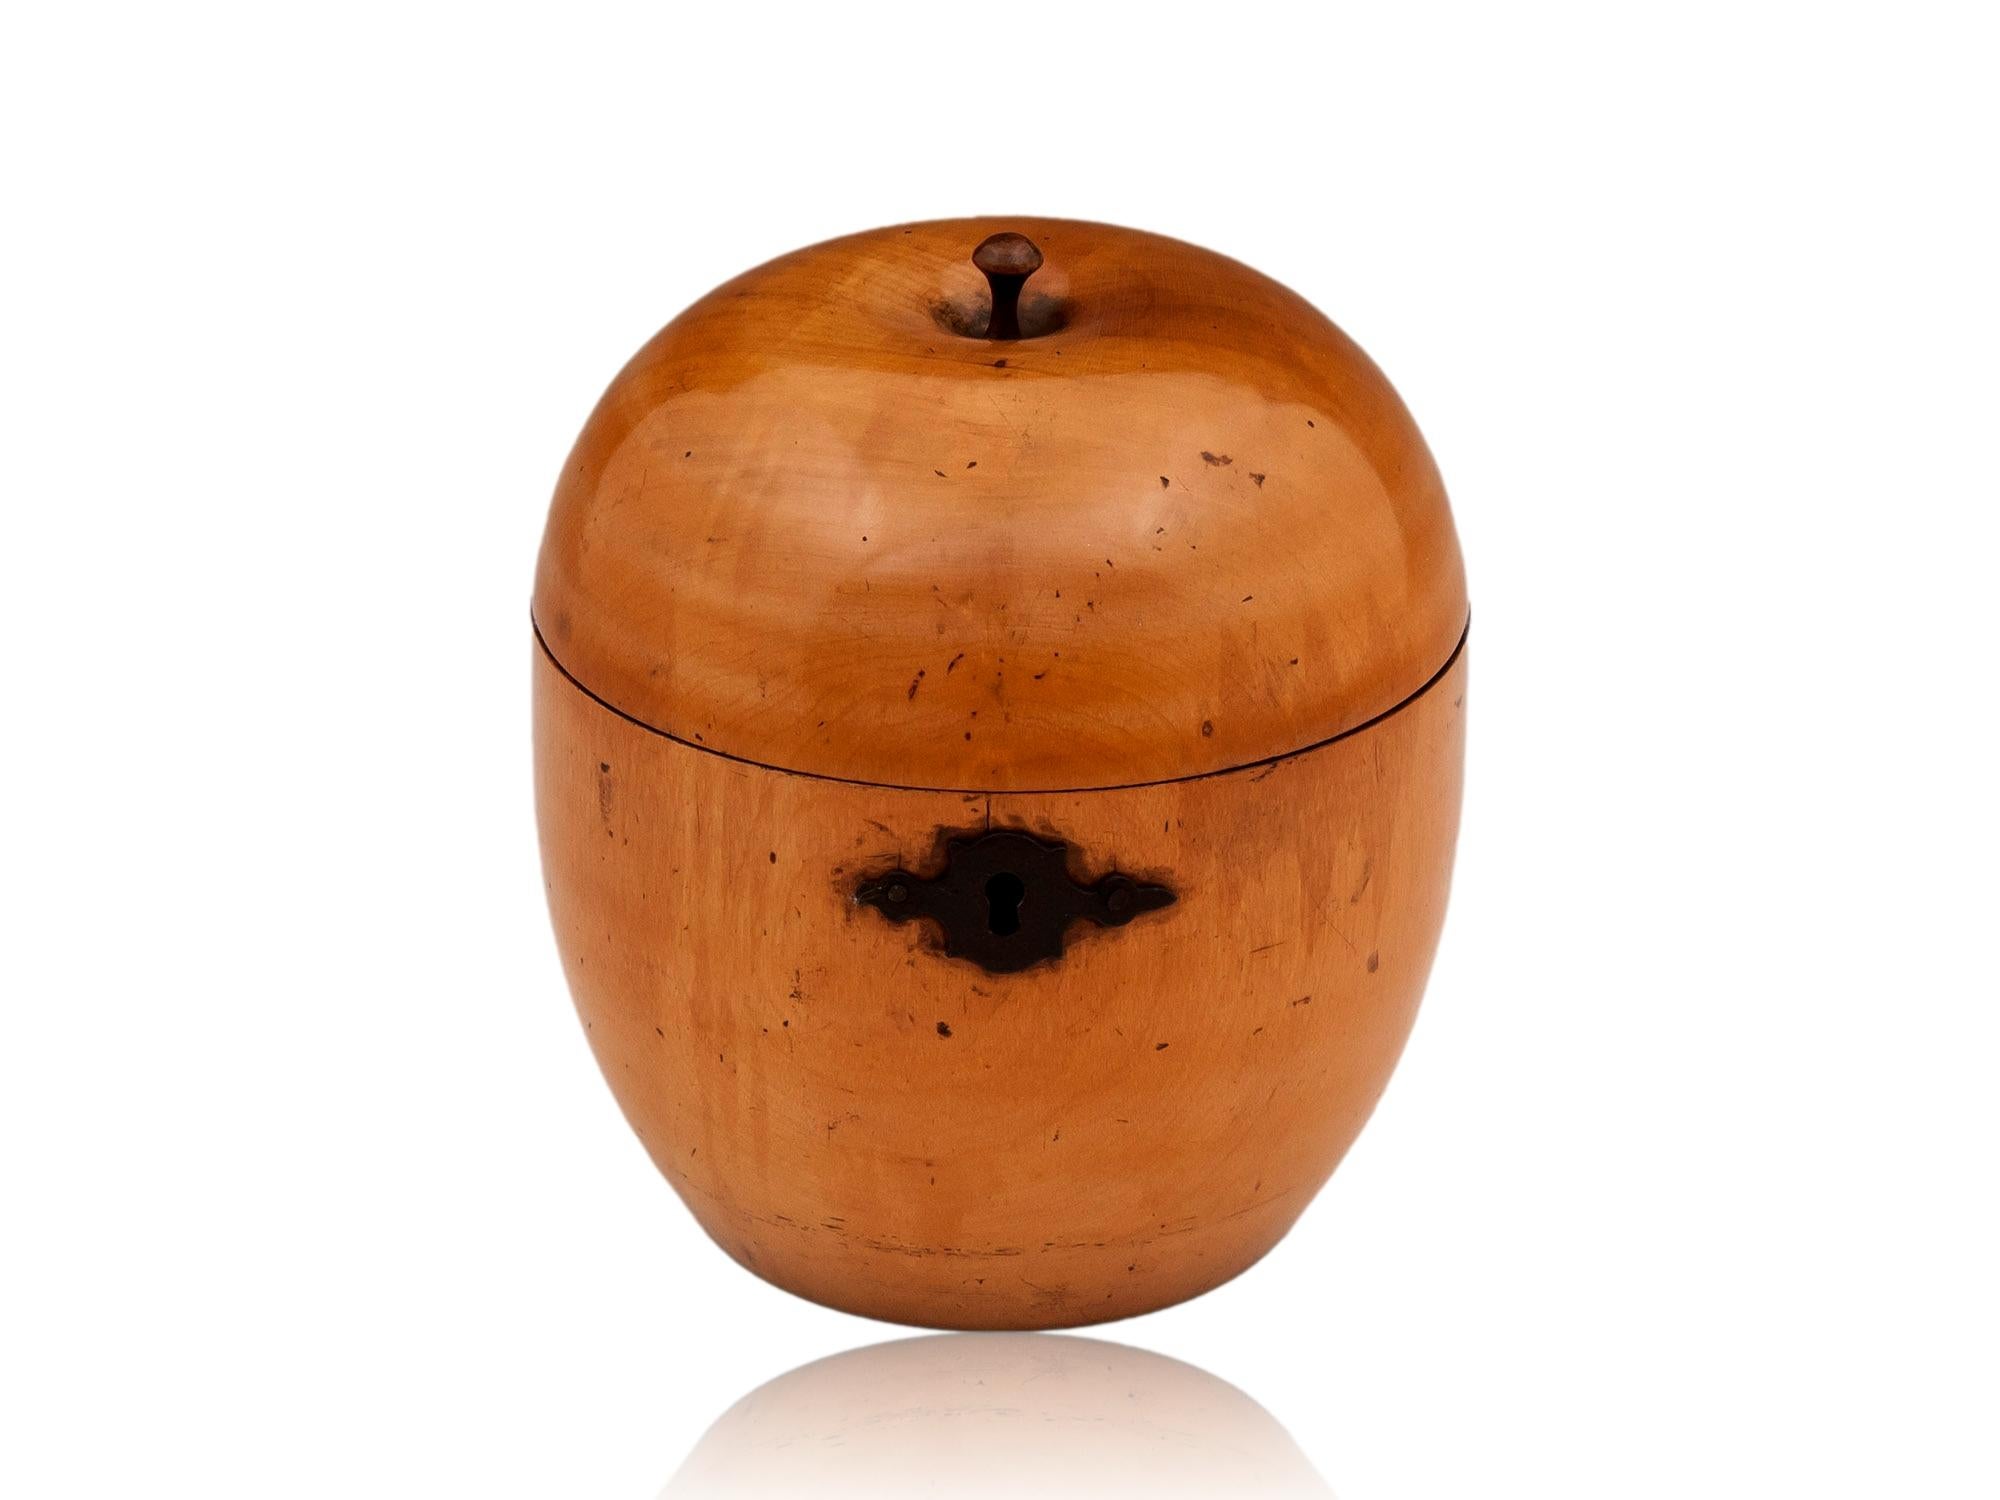 Shaped as an Apple

From our Tea Caddy collection, we are delighted to offer this superb Georgian Apple Treen Tea Caddy. The Tea Caddy carved from Treen as a novelty Apple with a button stalk, shaped body and shaped cut steel escutcheon. When opened